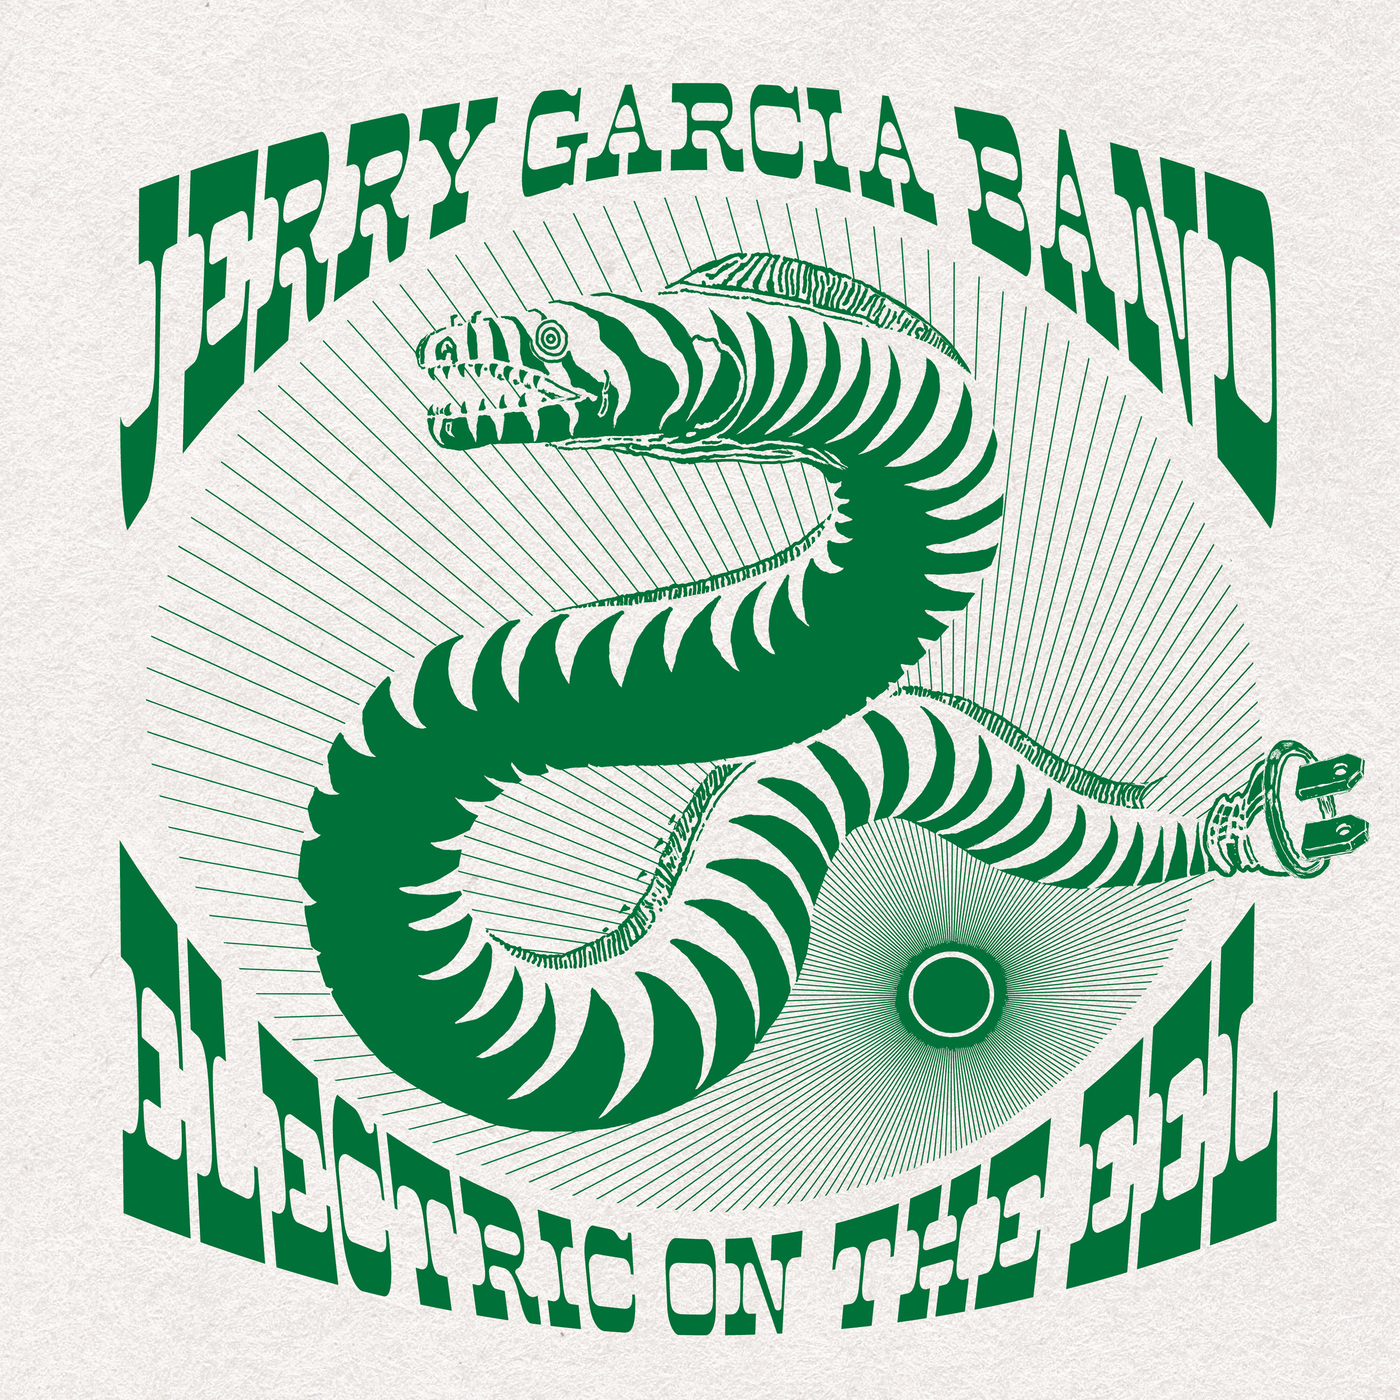 Jerry Garcia Band – Electric on the Eel (2019) [FLAC 24bit/88,2kHz]